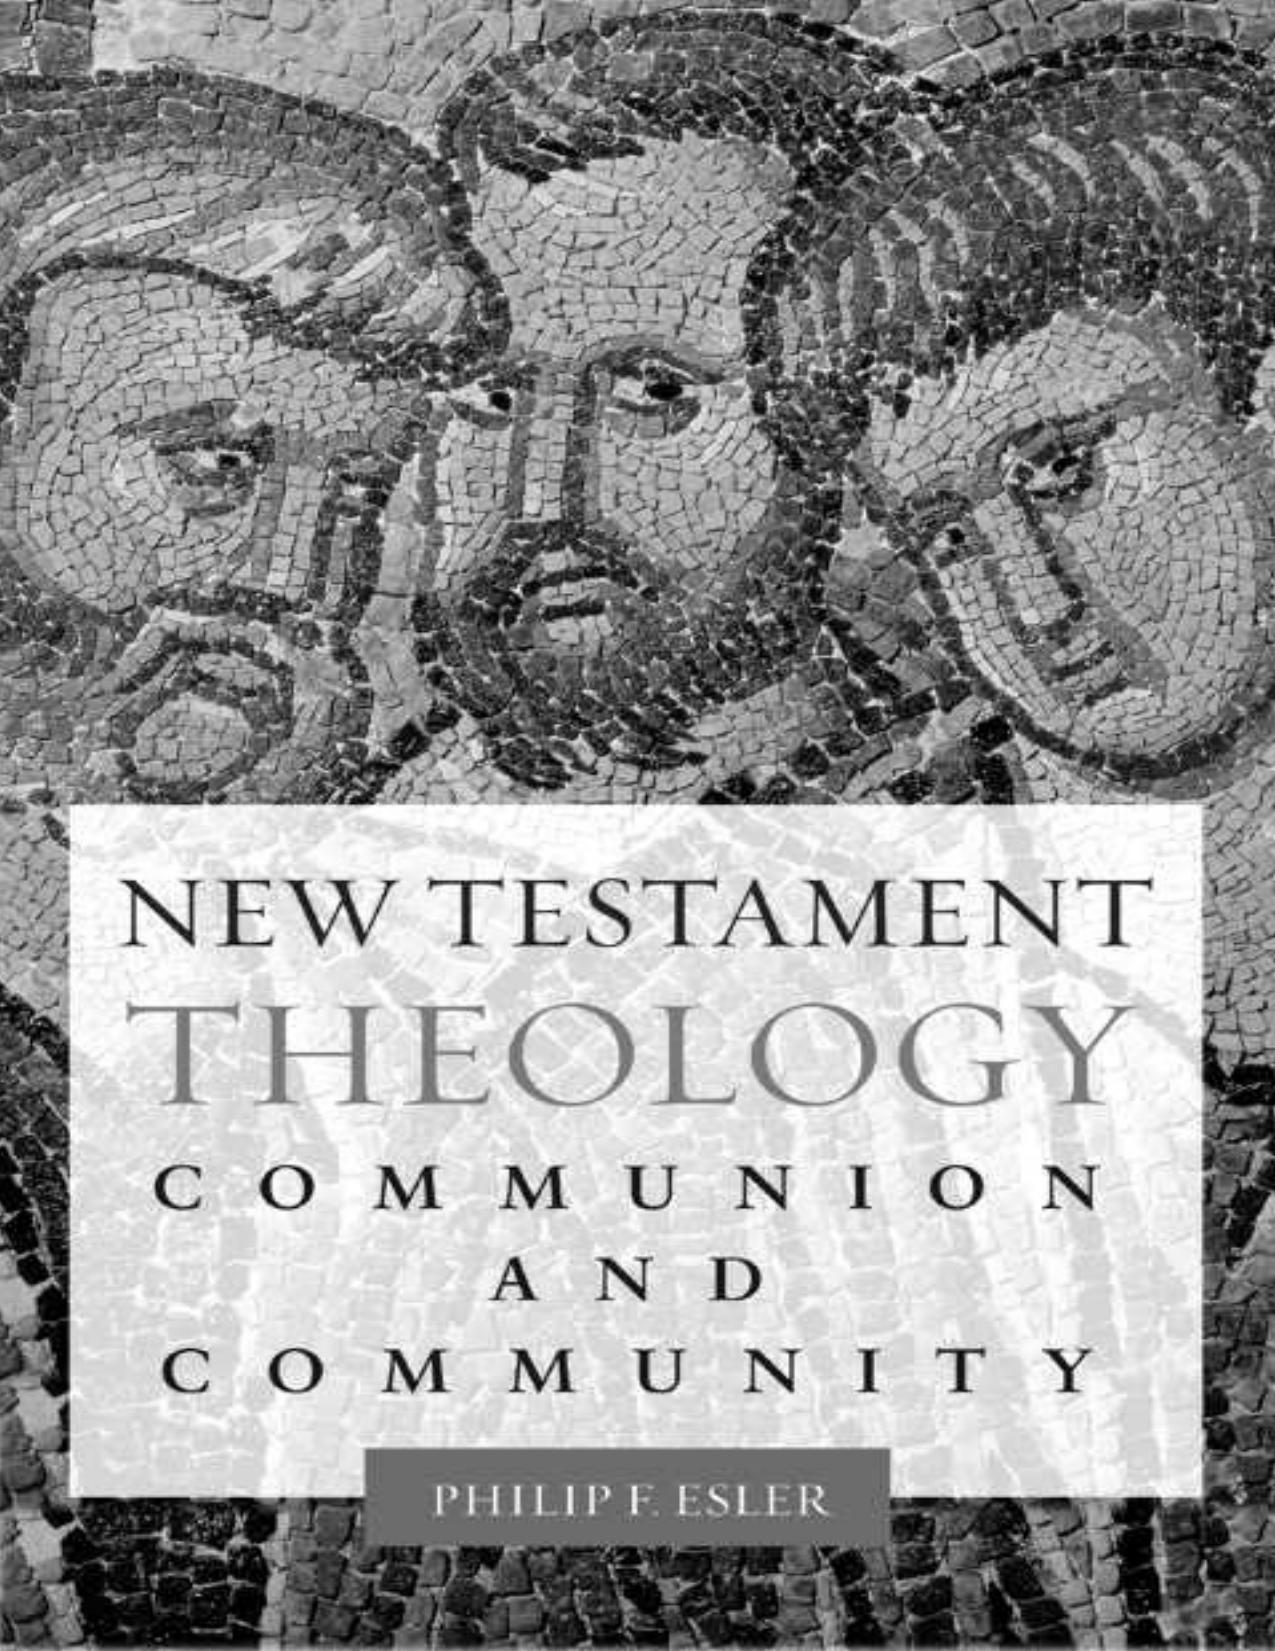 New Testament Theology: Communion and Community by Philip Francis Esler